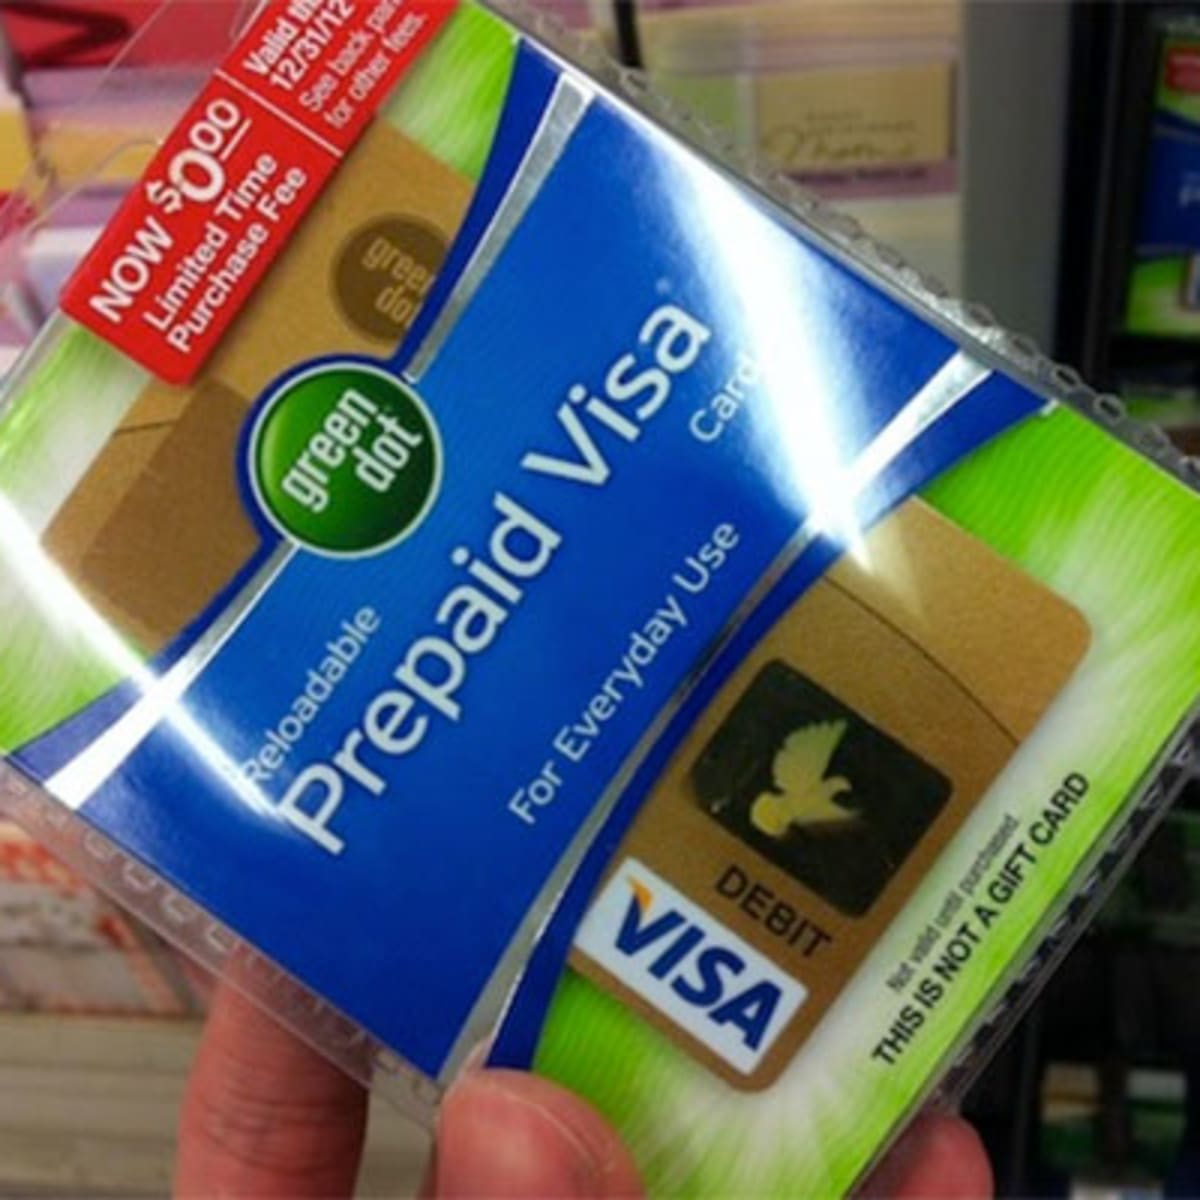 Low-Income Users Get Nailed With Reloadable Debit Card Fees